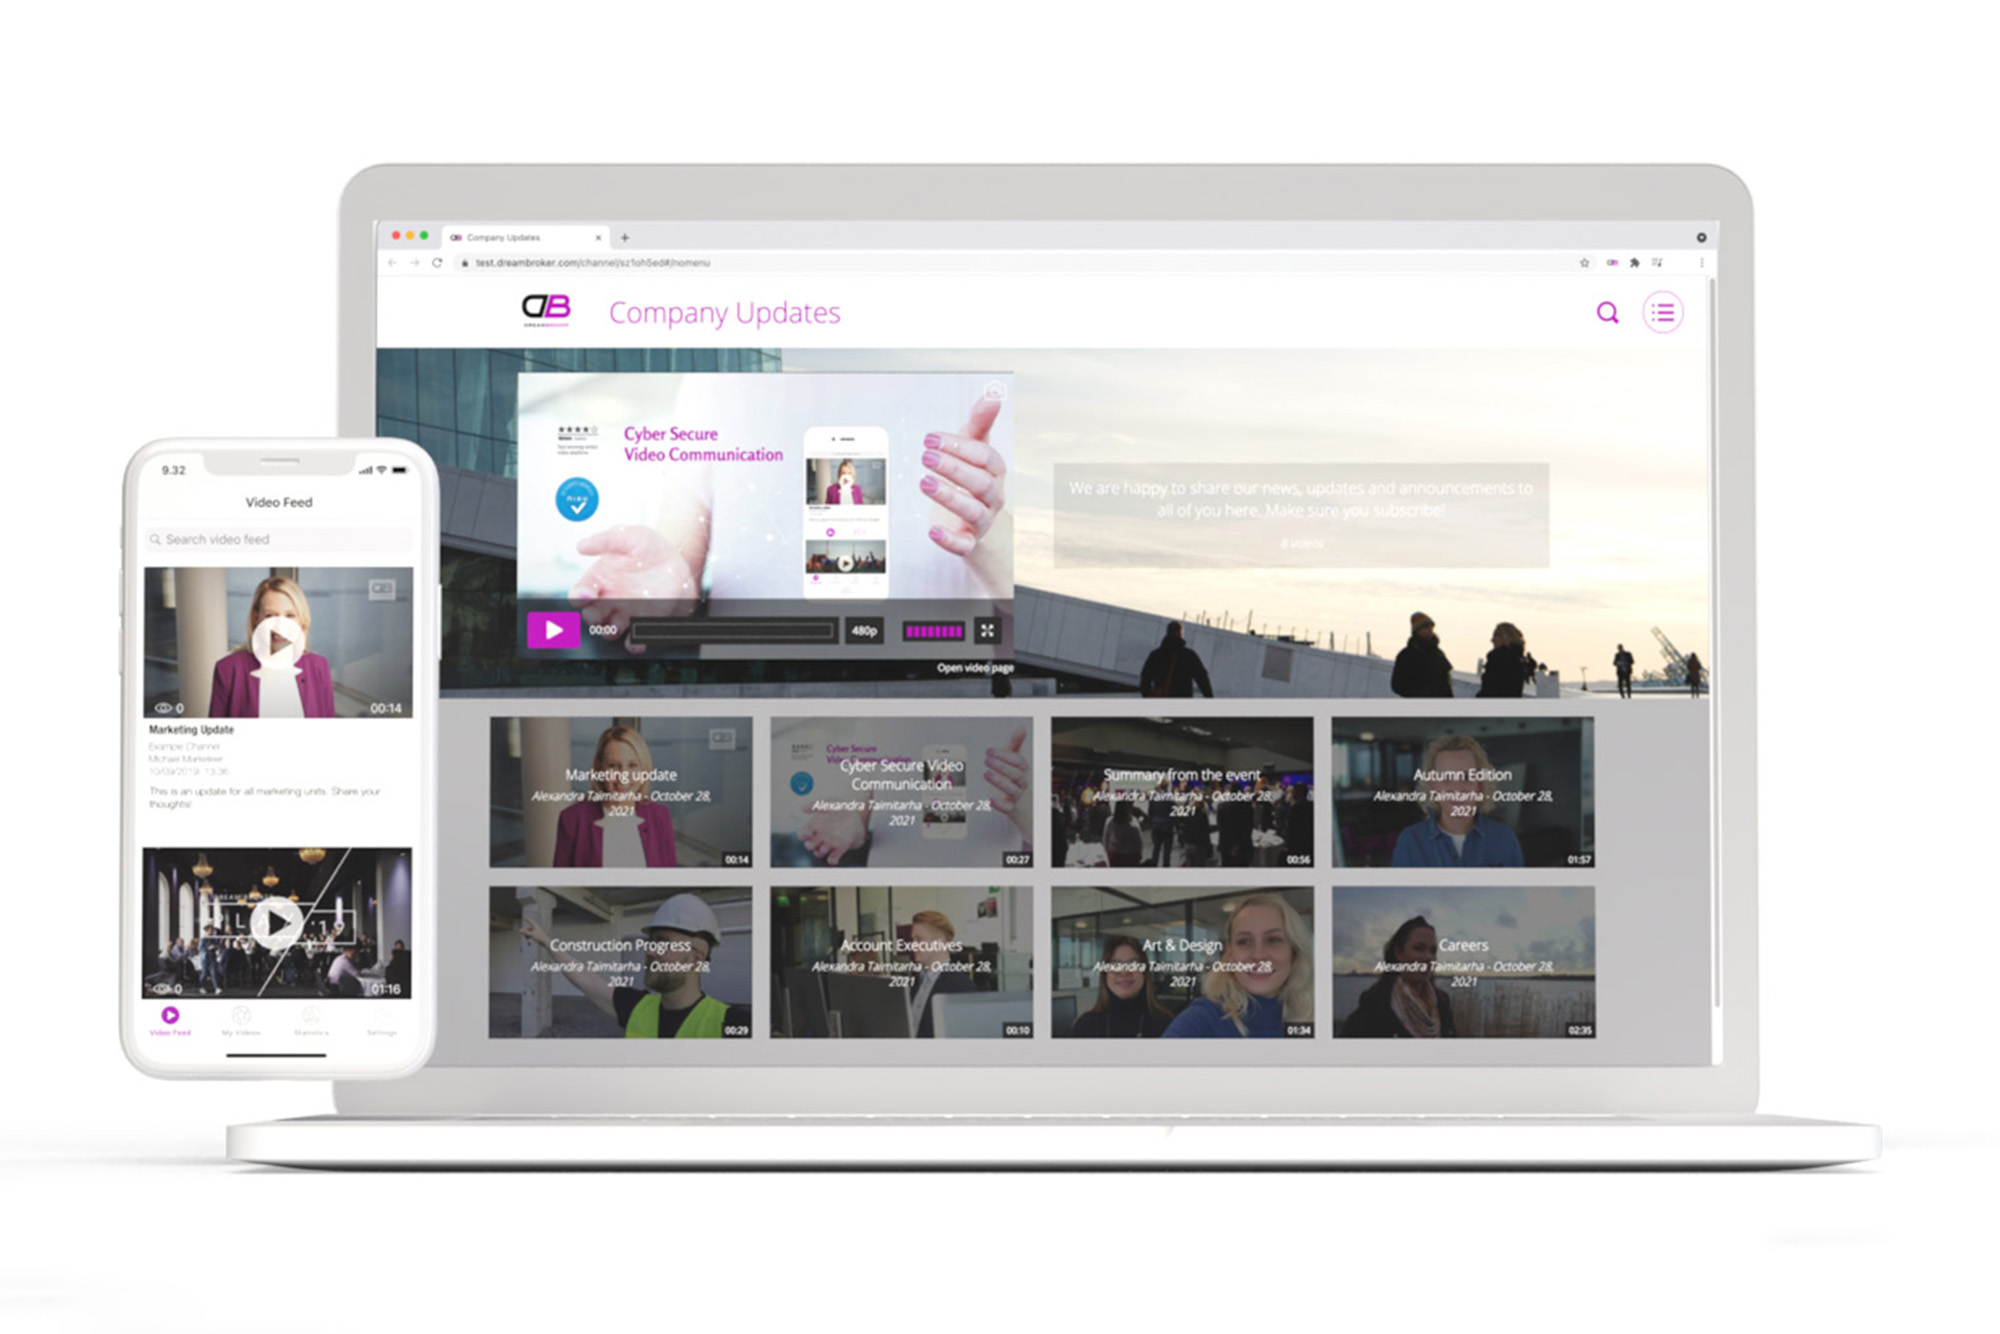 Publish and share your videos with just one click, anywhere and with anyone. Add video to your website, send it via email or integrate it into your intranet.